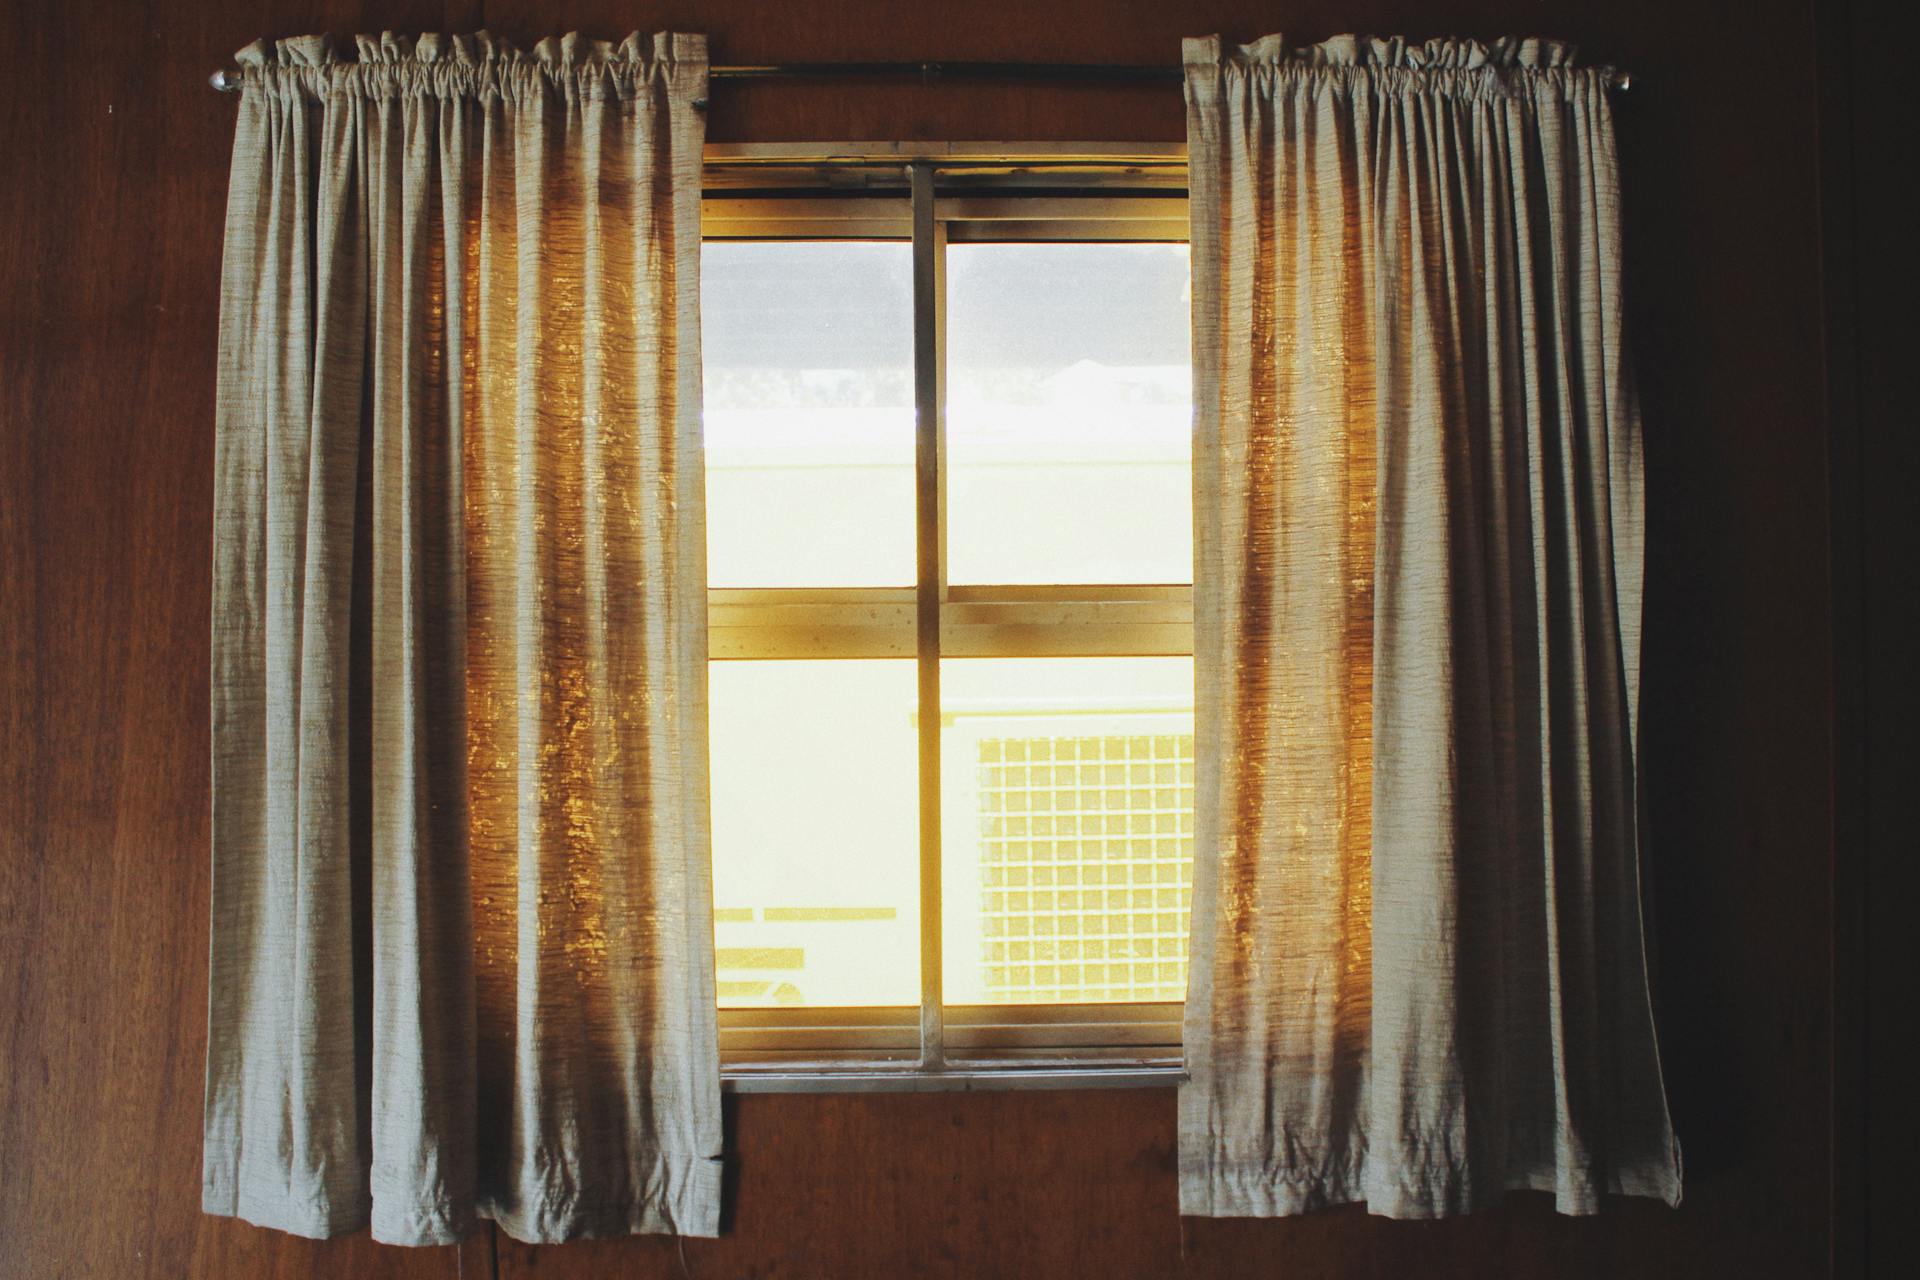 An image of a window with short grey curtains set into brown walls. There is soft yellow light coming through.